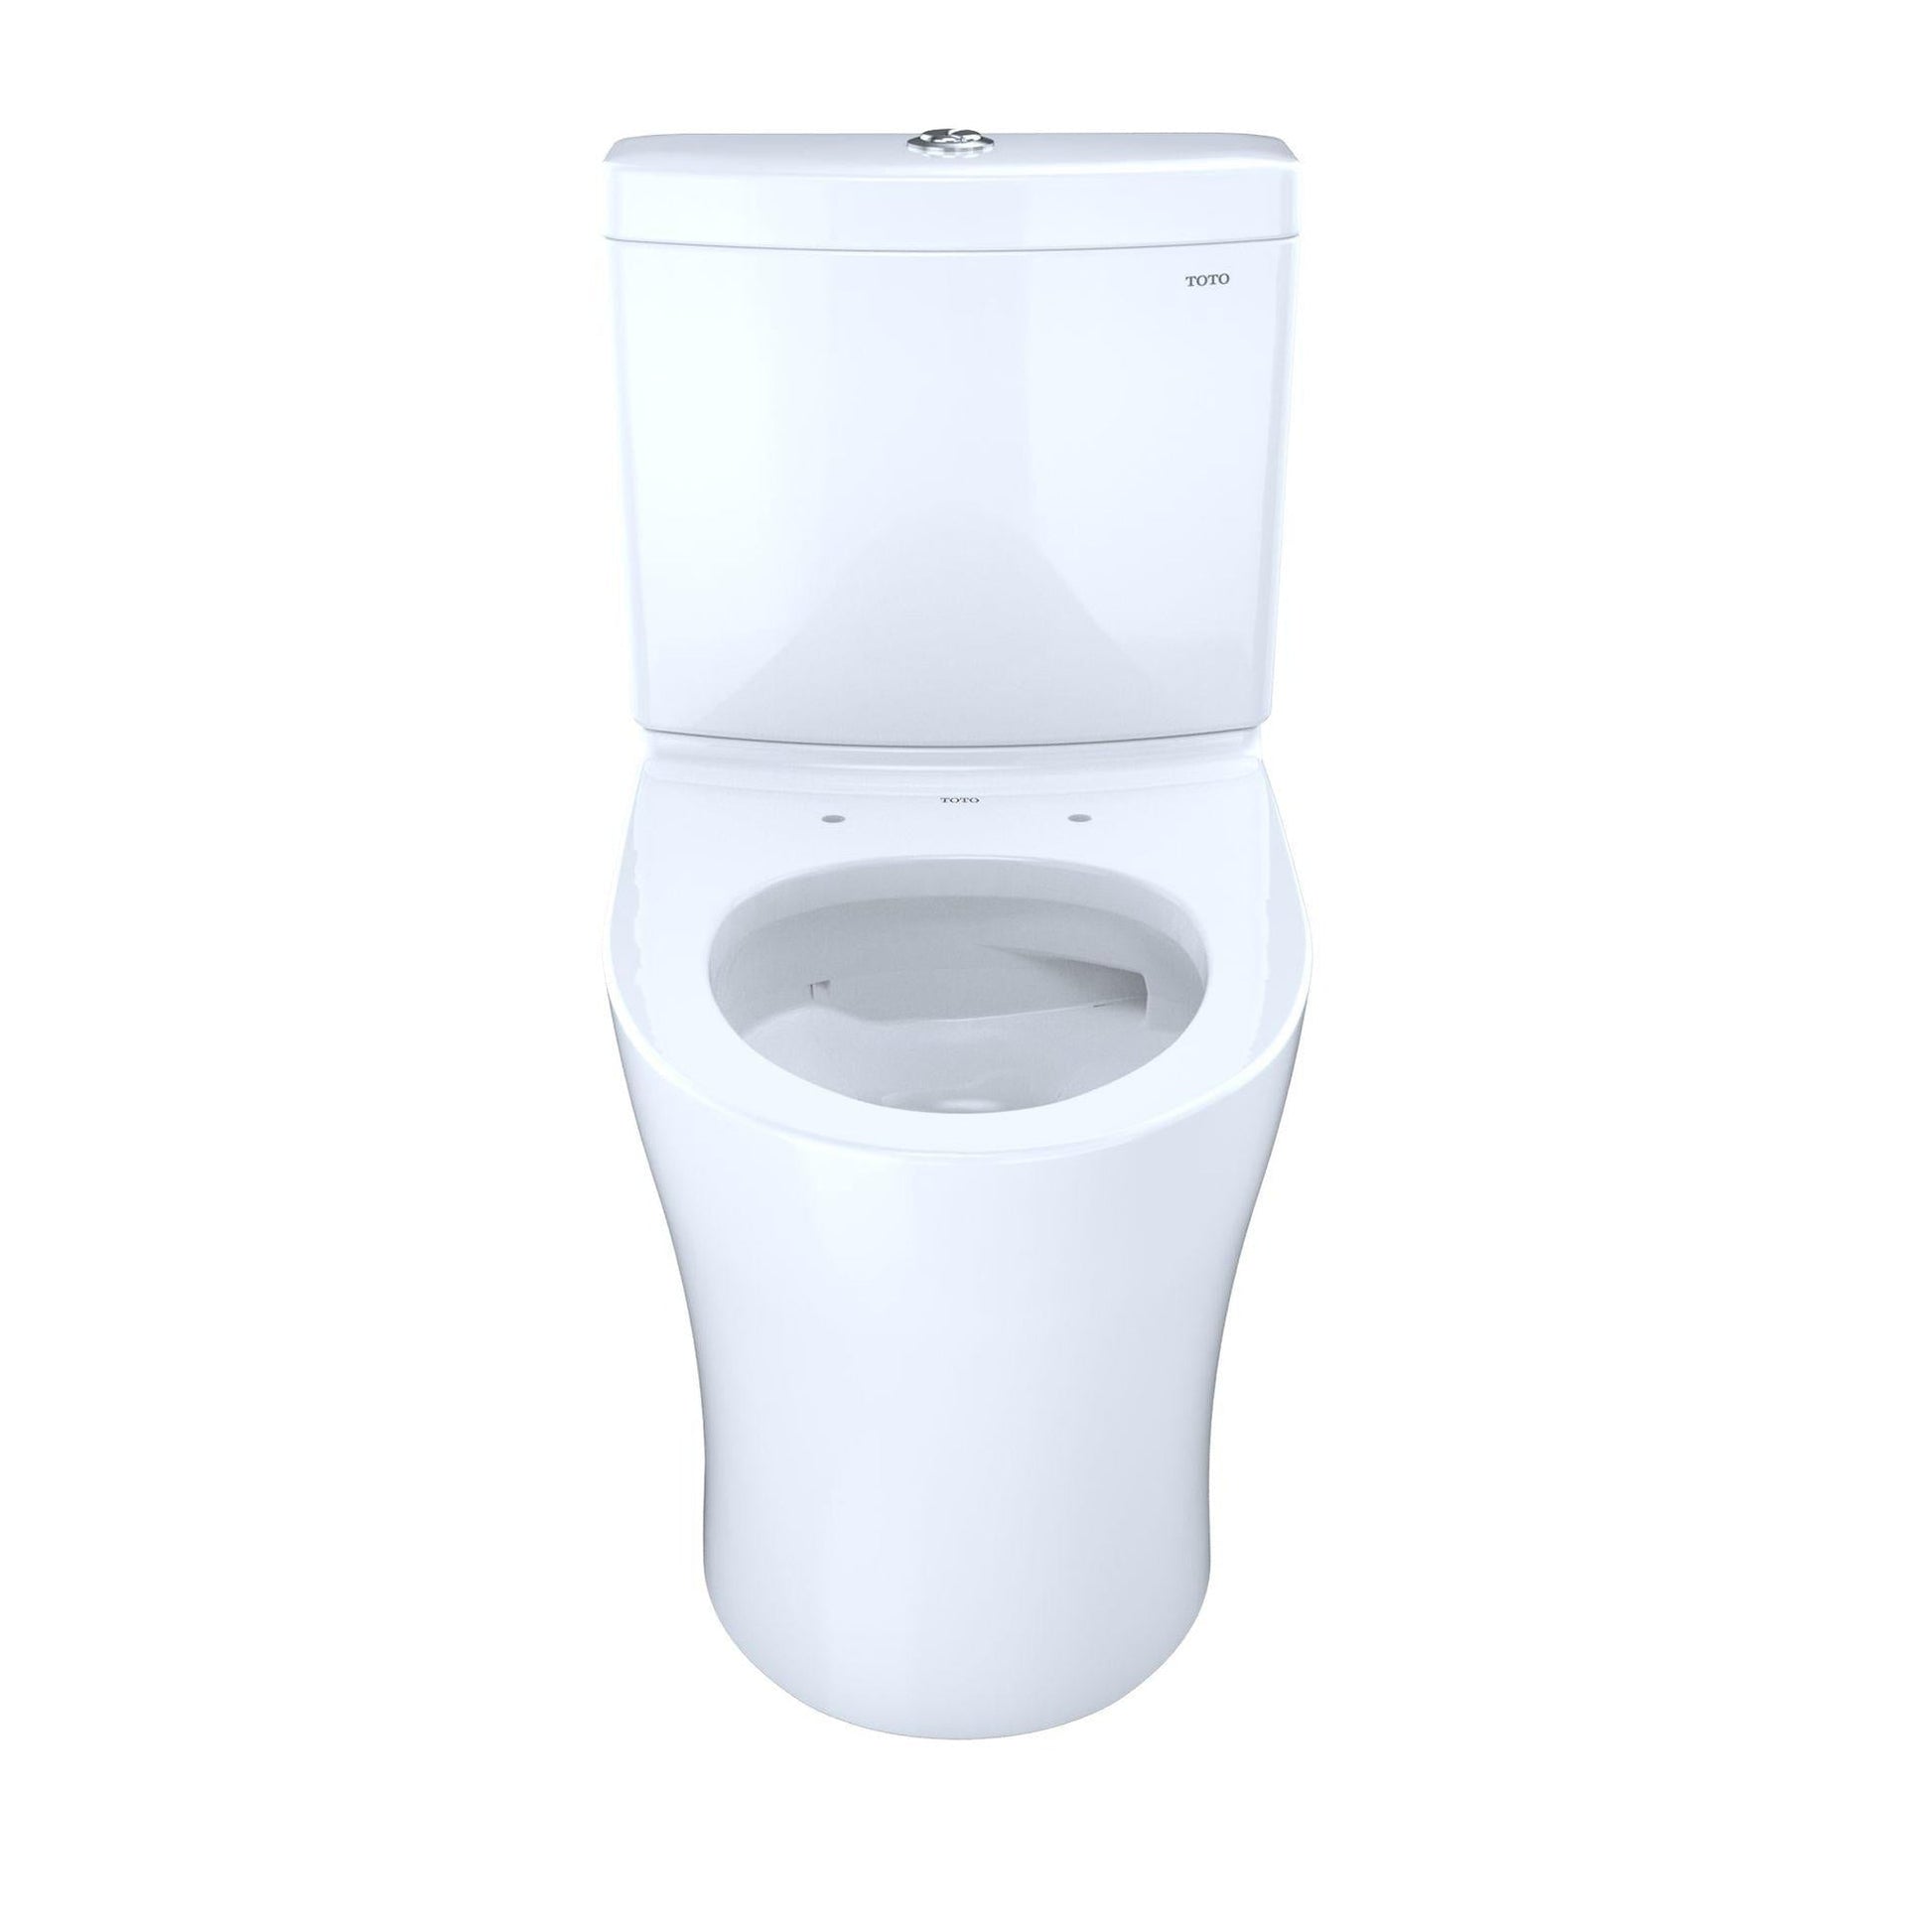 TOTO Aquia IV Cotton White 1.28 GPF & 0.8 GPF Dual-Flush Two-Piece Elongated Toilet With WASHLET+ Connection - Slim Seat Included